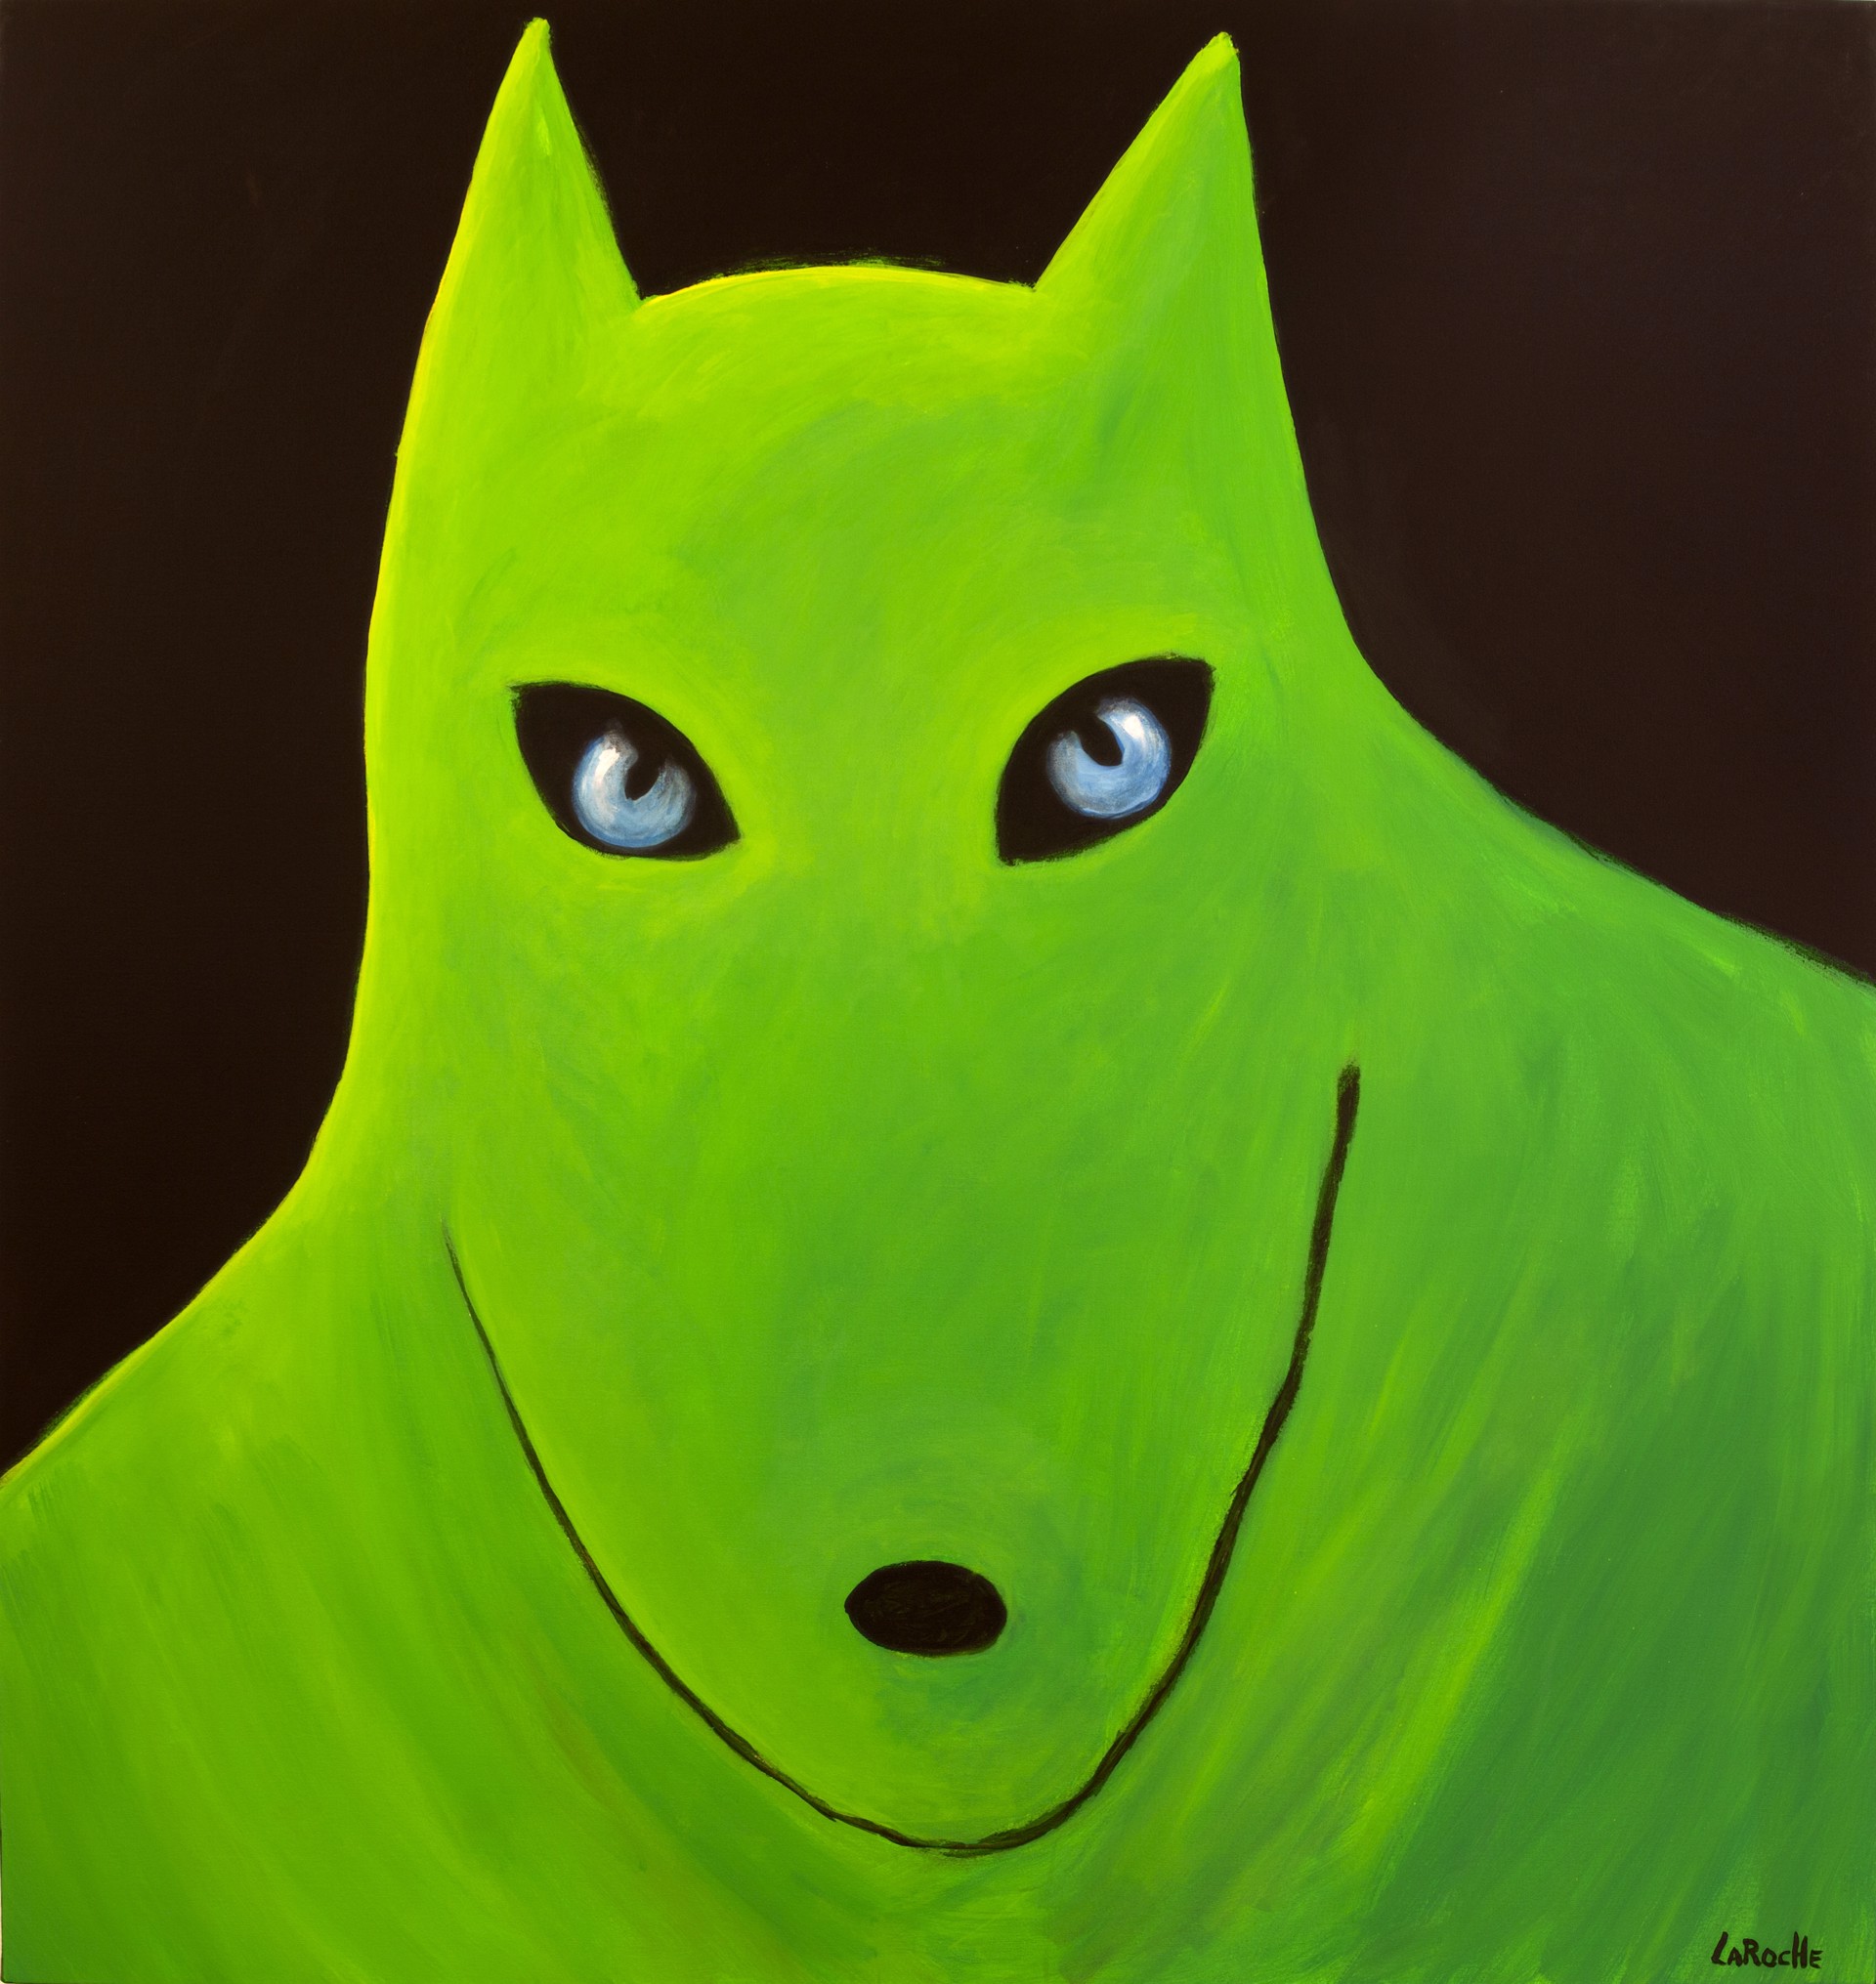 Wild Green Wolf - Giclee Print on Canvas 30x30in $2700 -  Giclee Print on Canvas 40x40in $3950 by Carole LaRoche